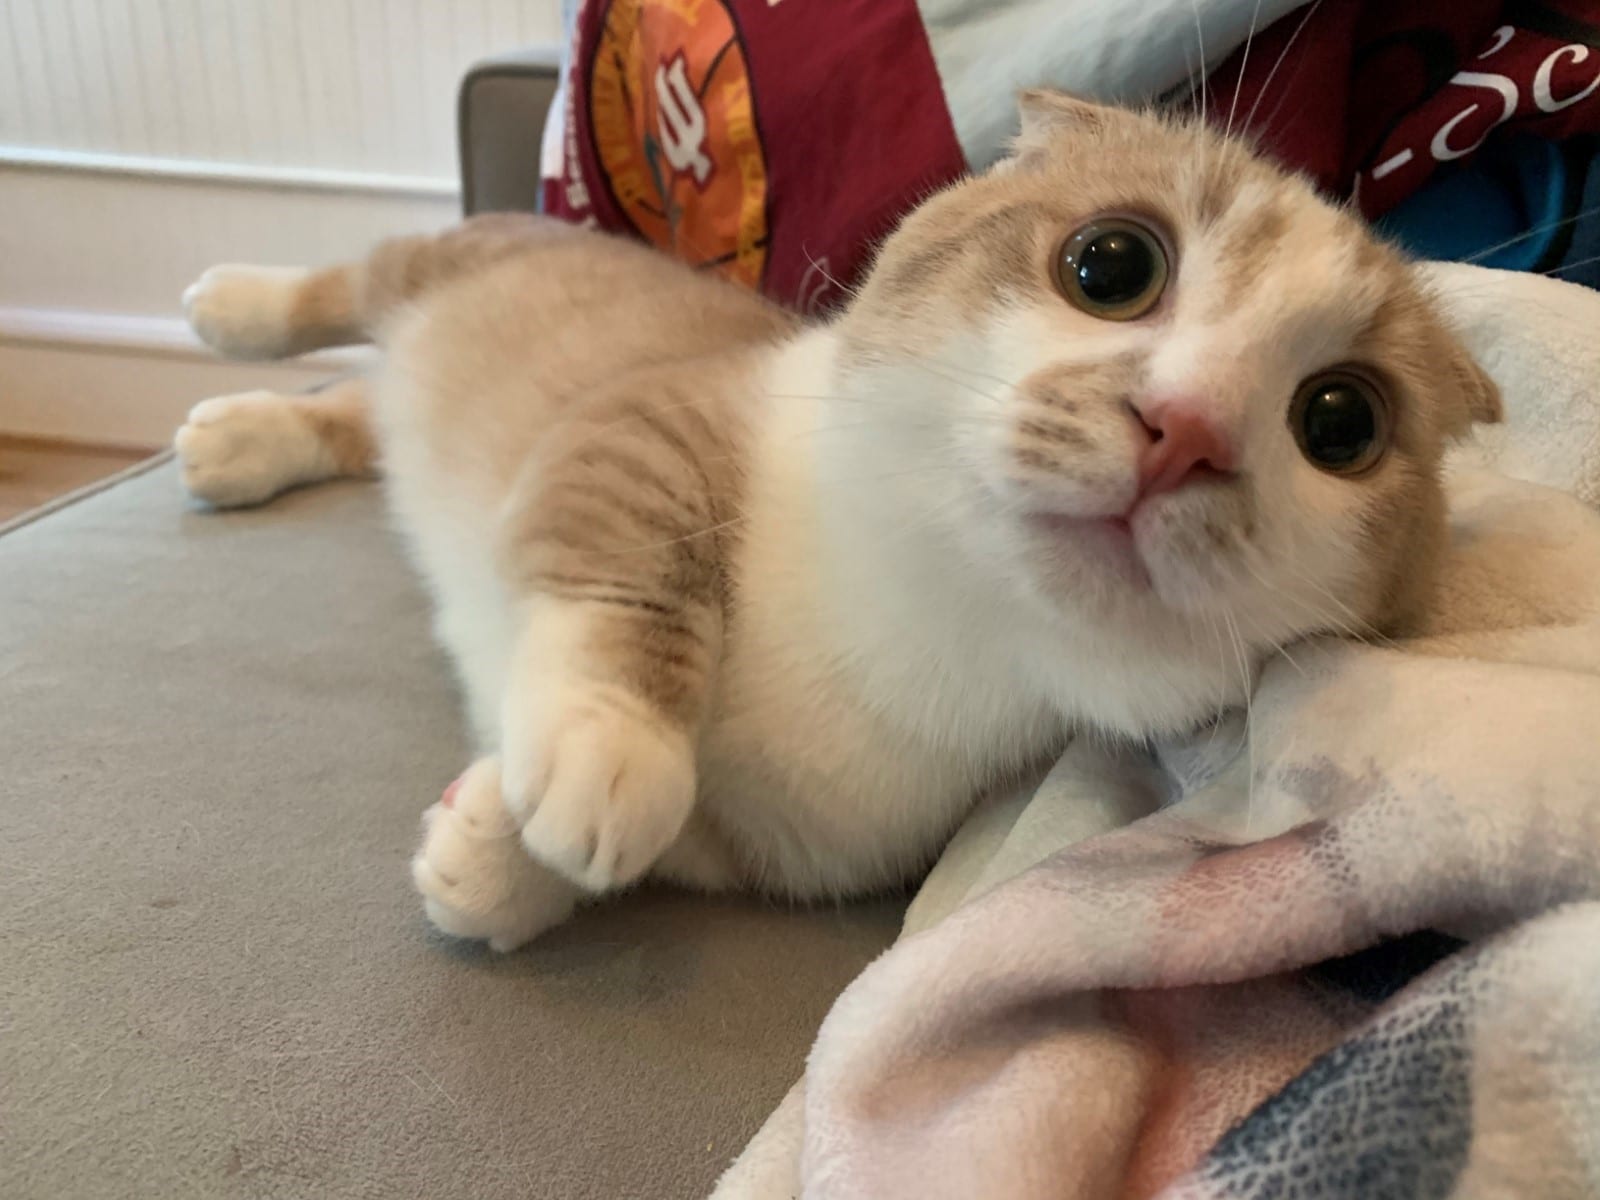 Adorable kitten looking into camera with big eyes